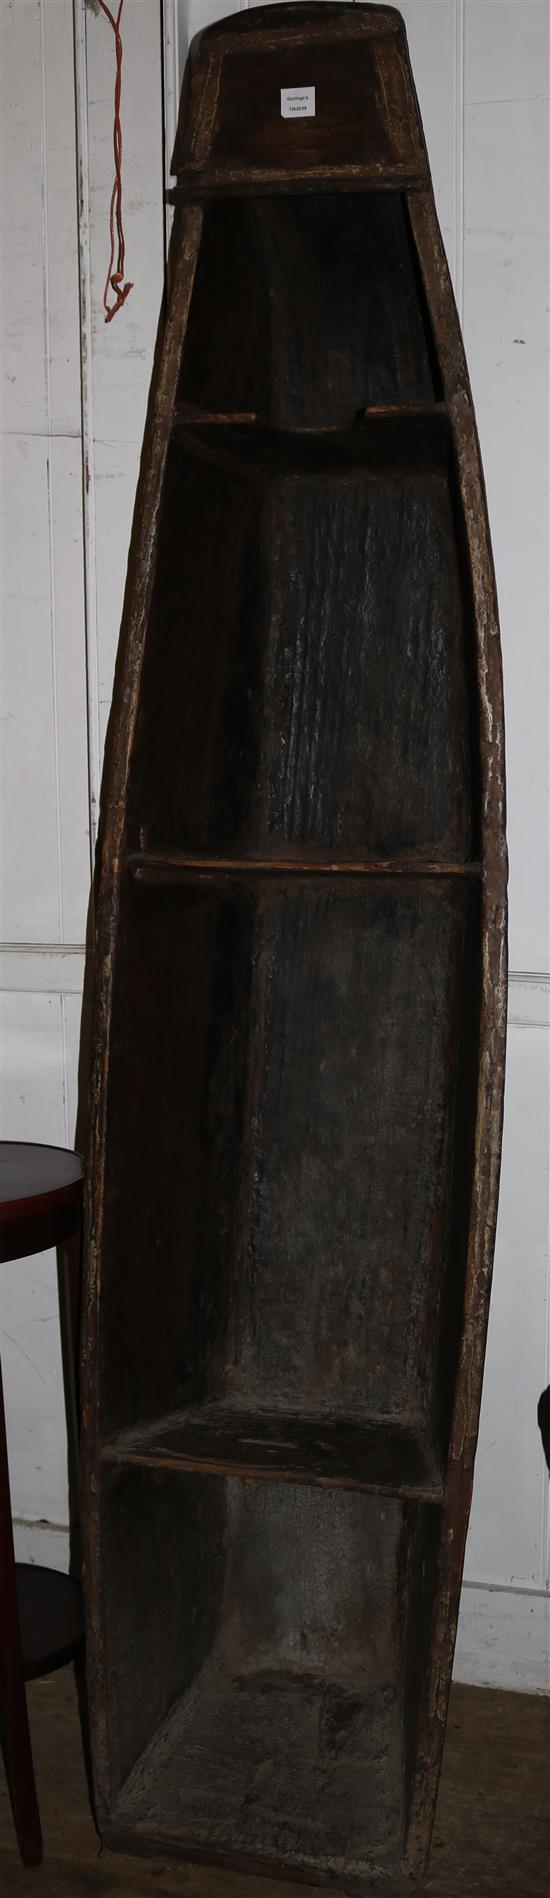 Chinese canoe converted to a standing bookcase